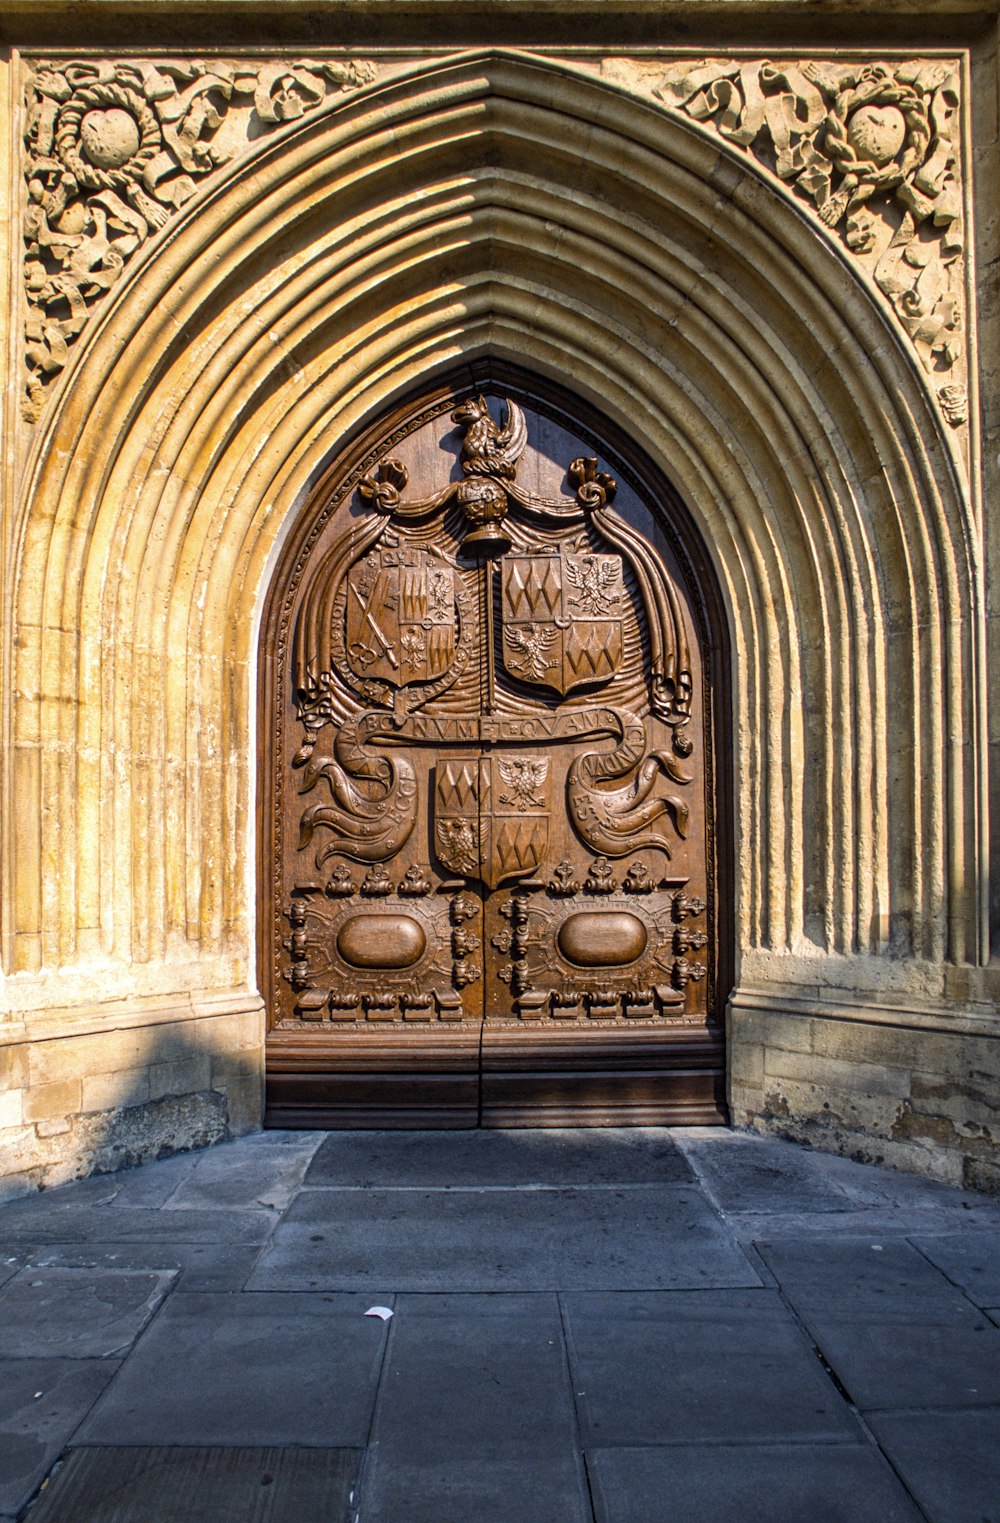 a large wooden door in a stone building